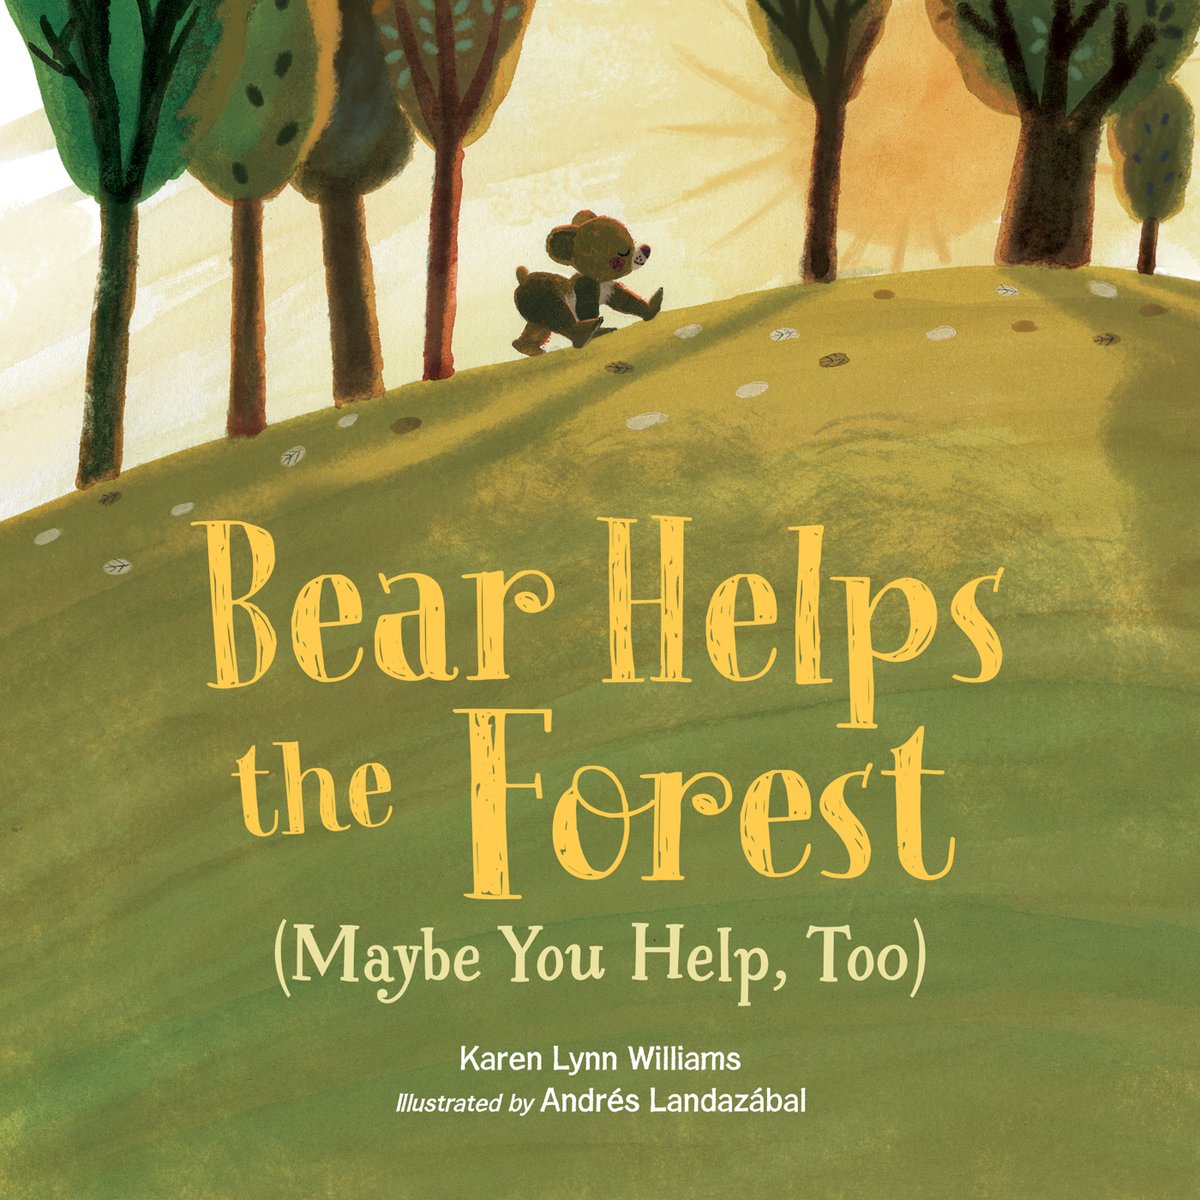 Happy book birthday to BEAR HELPS THE FOREST (MAYBE YOU HELP, TOO) by @karenlynnwilli1 and illustrated by Andrés Landazábal from @charlesbridge. It's the perfect fall book for every kid wondering why it takes so long for the leaves to show up each year for jumping!